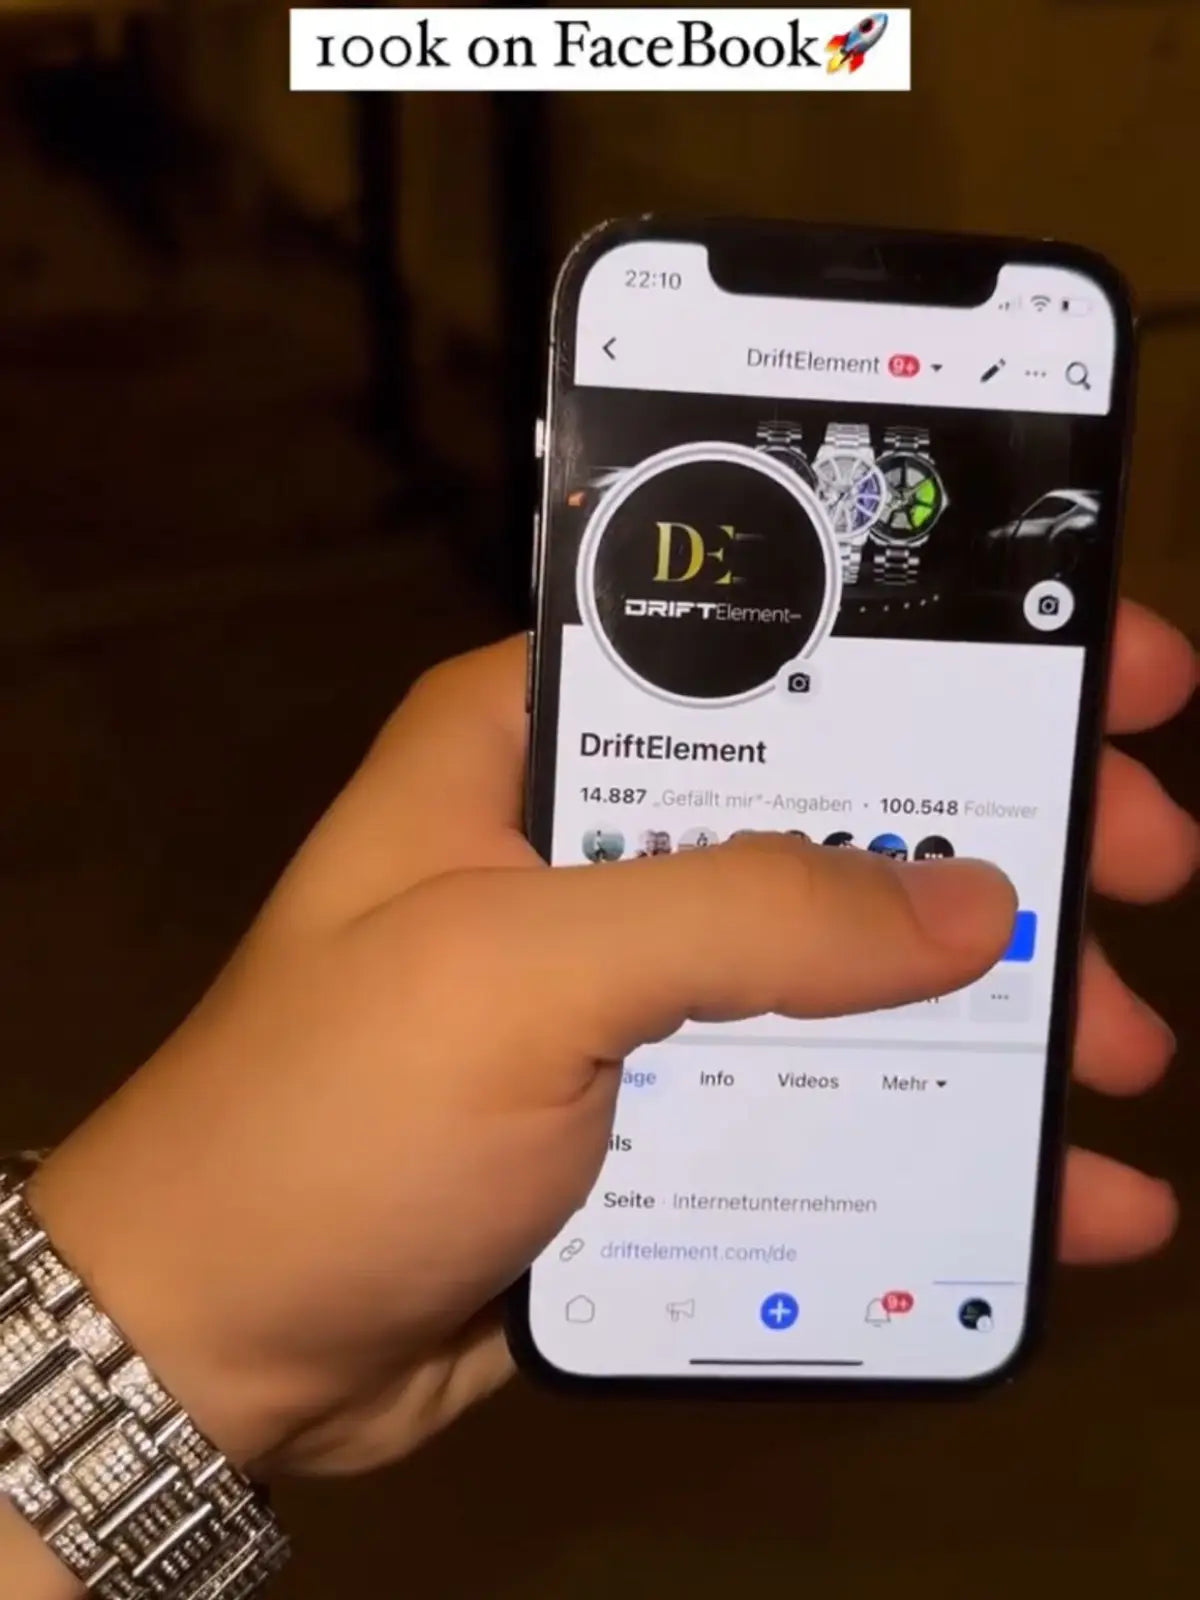 The image shows a person's hand holding a smartphone that displays DriftElement's Facebook page. On the screen, there's a profile picture of the DriftElement logo and a cover photo showcasing a selection of the brand's unique rim-designed watches, reflecting the company's innovative approach to watch design. The wrist of the hand holding the phone is adorned with a DriftElement watch featuring the signature rim design, suggesting a proud display of brand affiliation. 